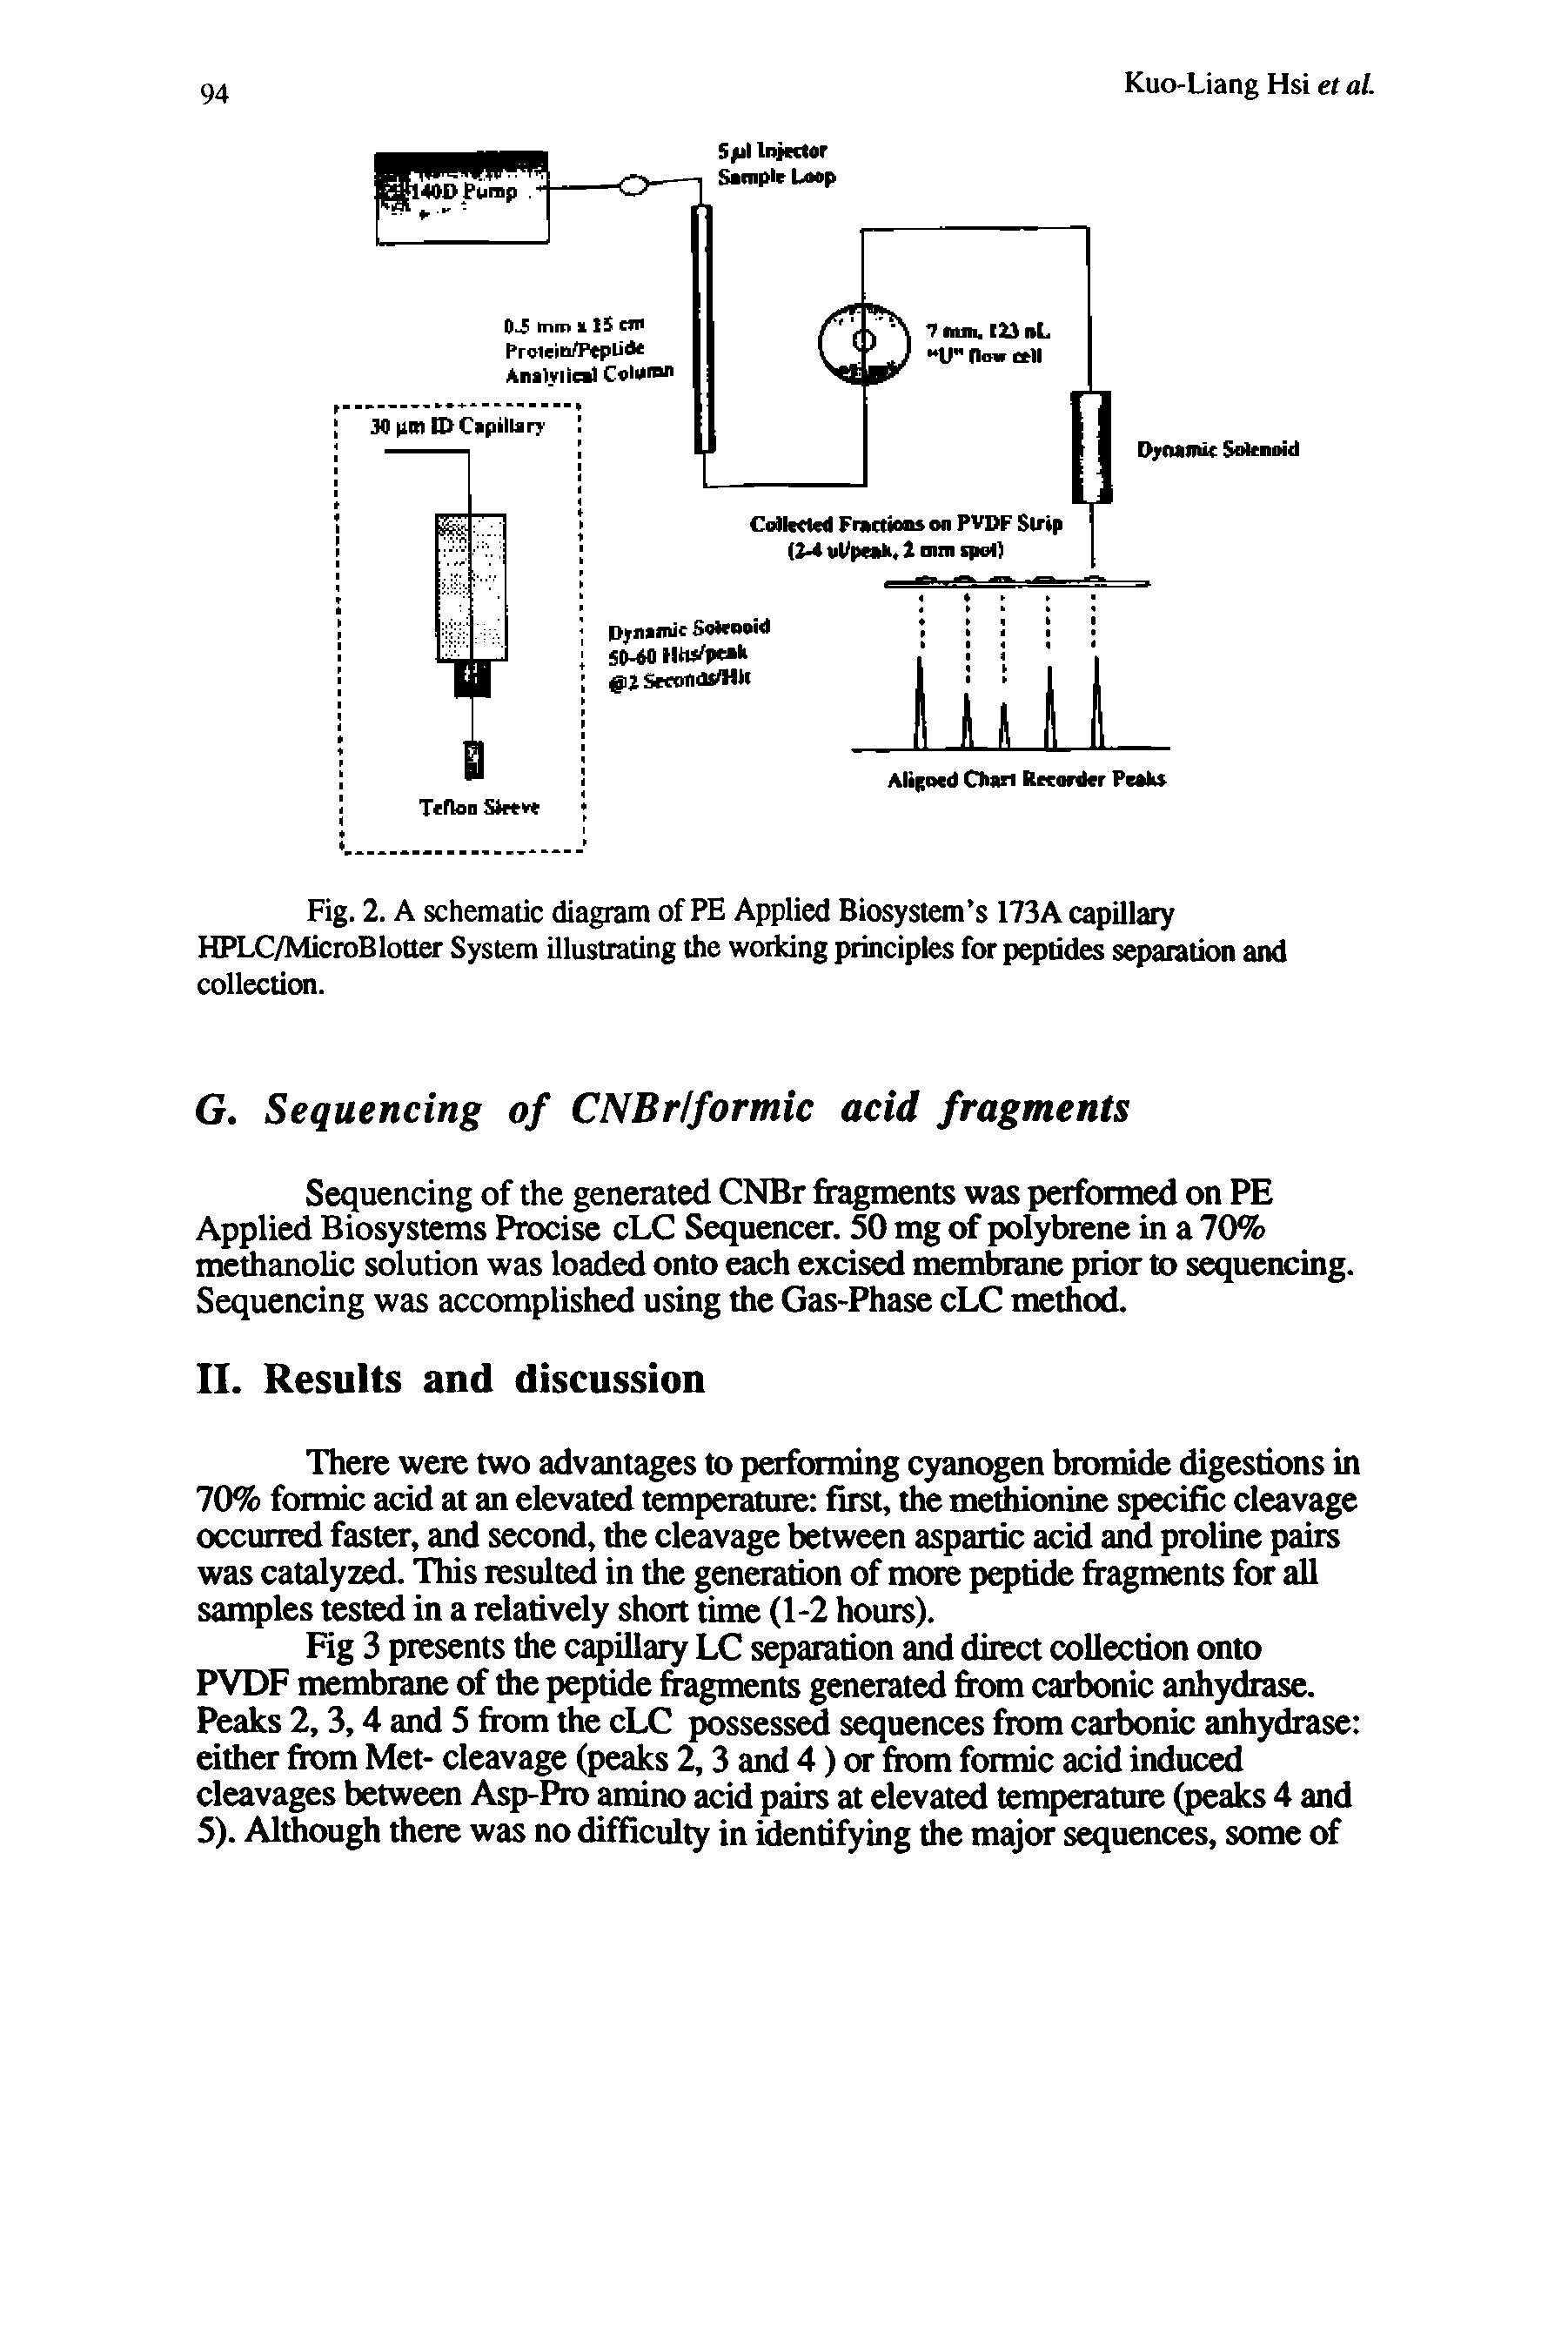 Fig. 2. A schematic diagram of PE Applied Biosystem s 173A capillary HPLC/MicroBlotter System illustrating the woiidng principles for peptides separation and collection.